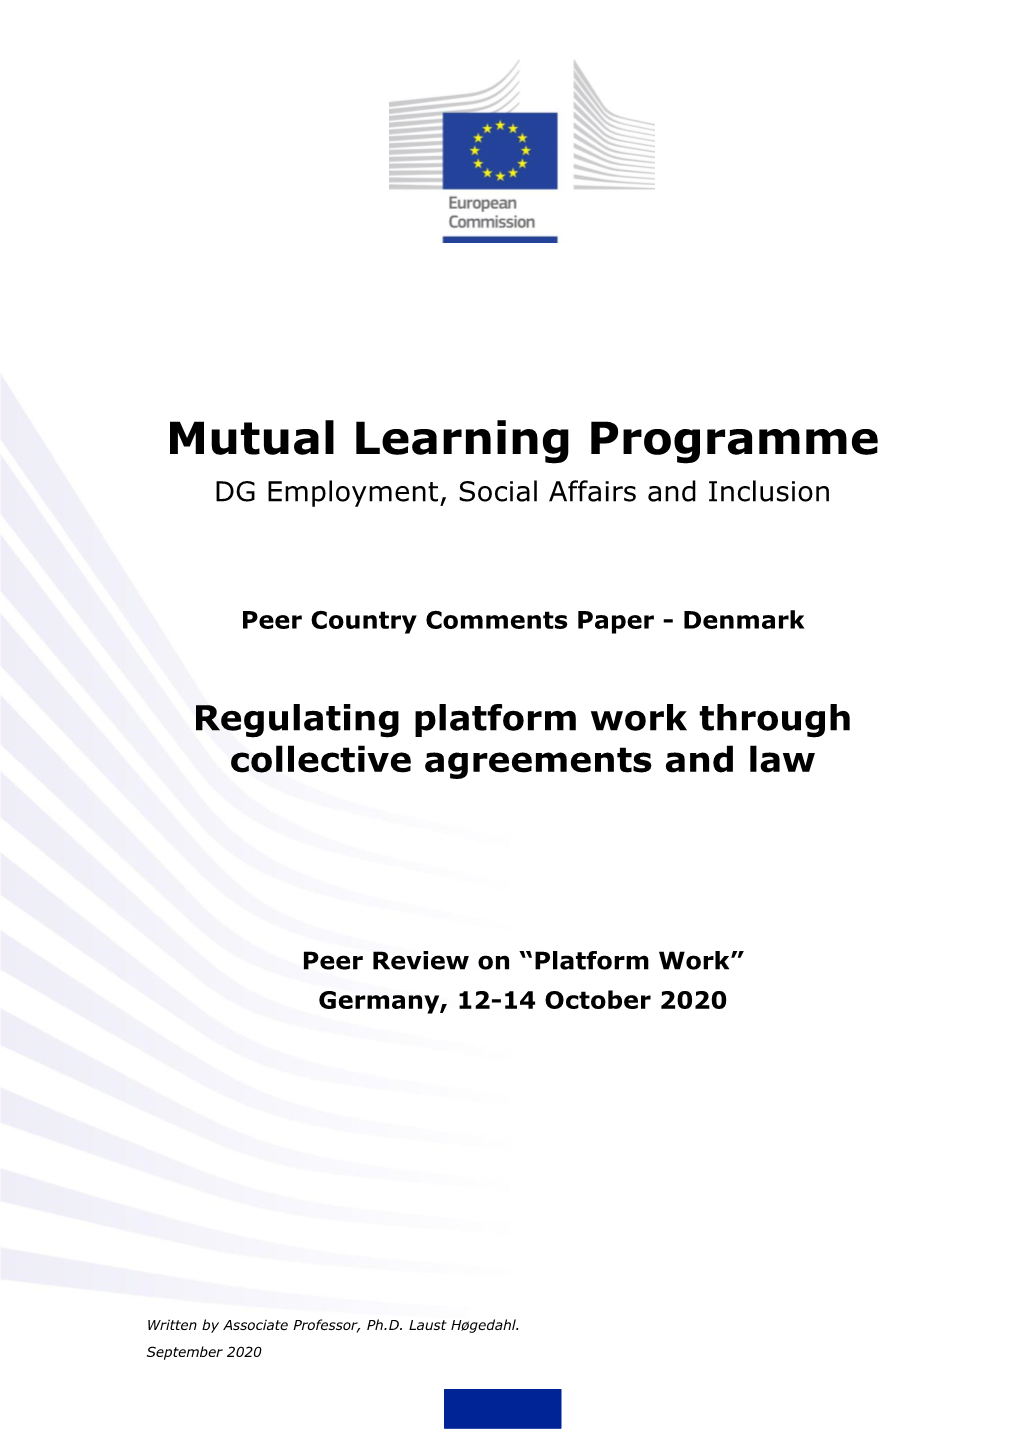 Mutual Learning Programme DG Employment, Social Affairs and Inclusion